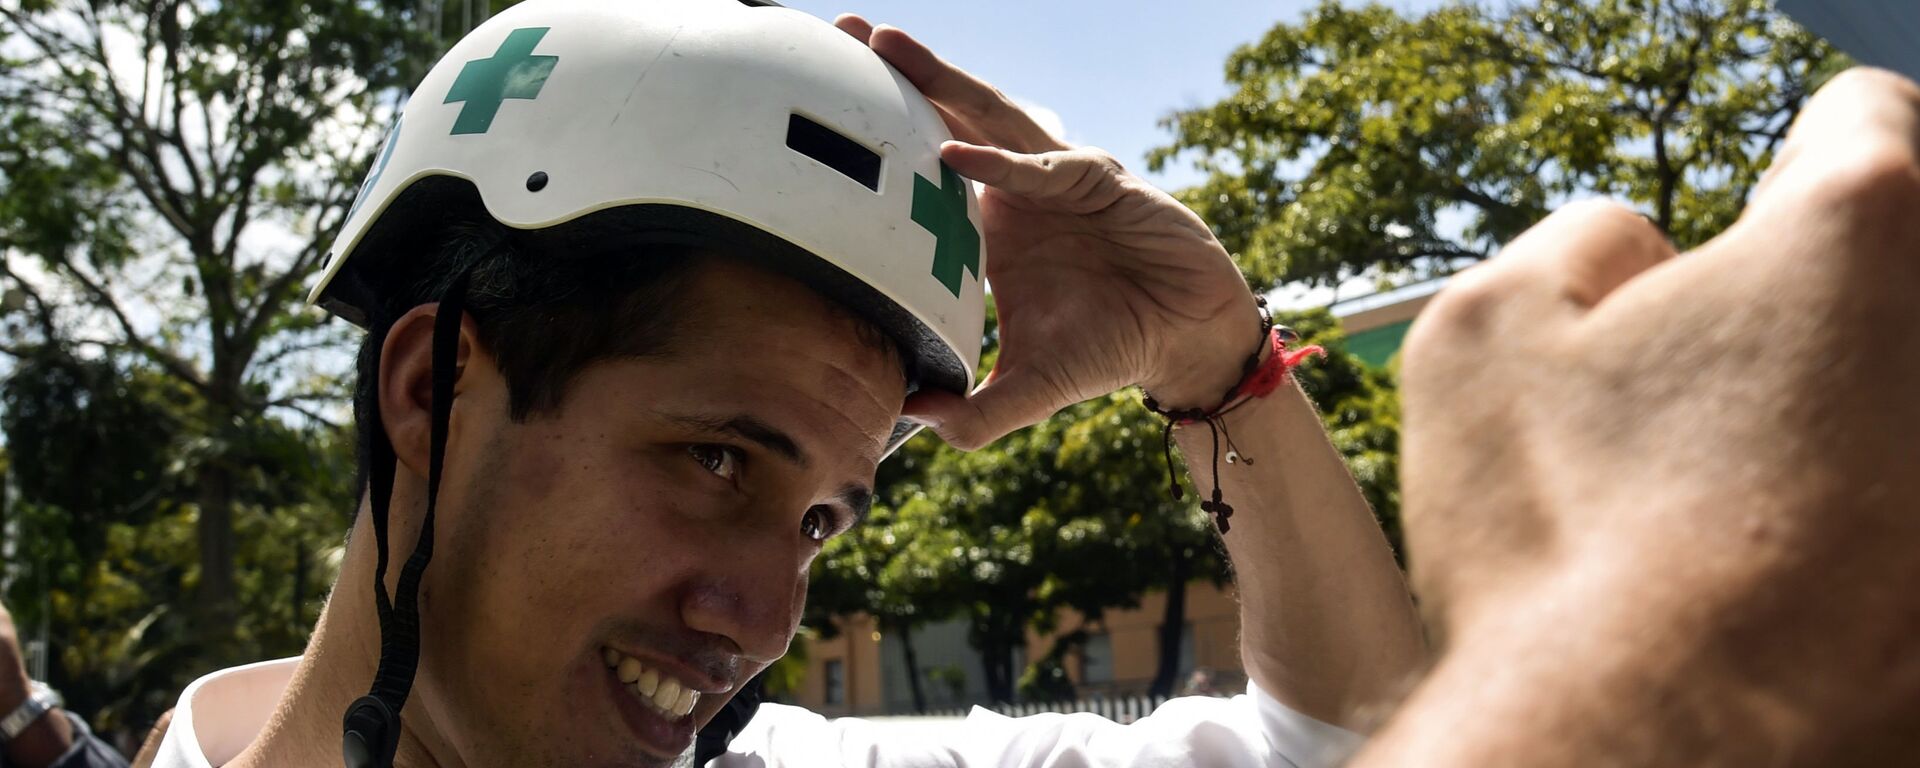 Venezuelan opposition leader and self declared acting president Juan Guaido wears a Green Cross helmet as he posses for a picture with volunteers of the movement Aid and Freedom Venezuela Coalition after delivering a speech in Caracas, on February 16, 2019 - Sputnik International, 1920, 21.02.2019